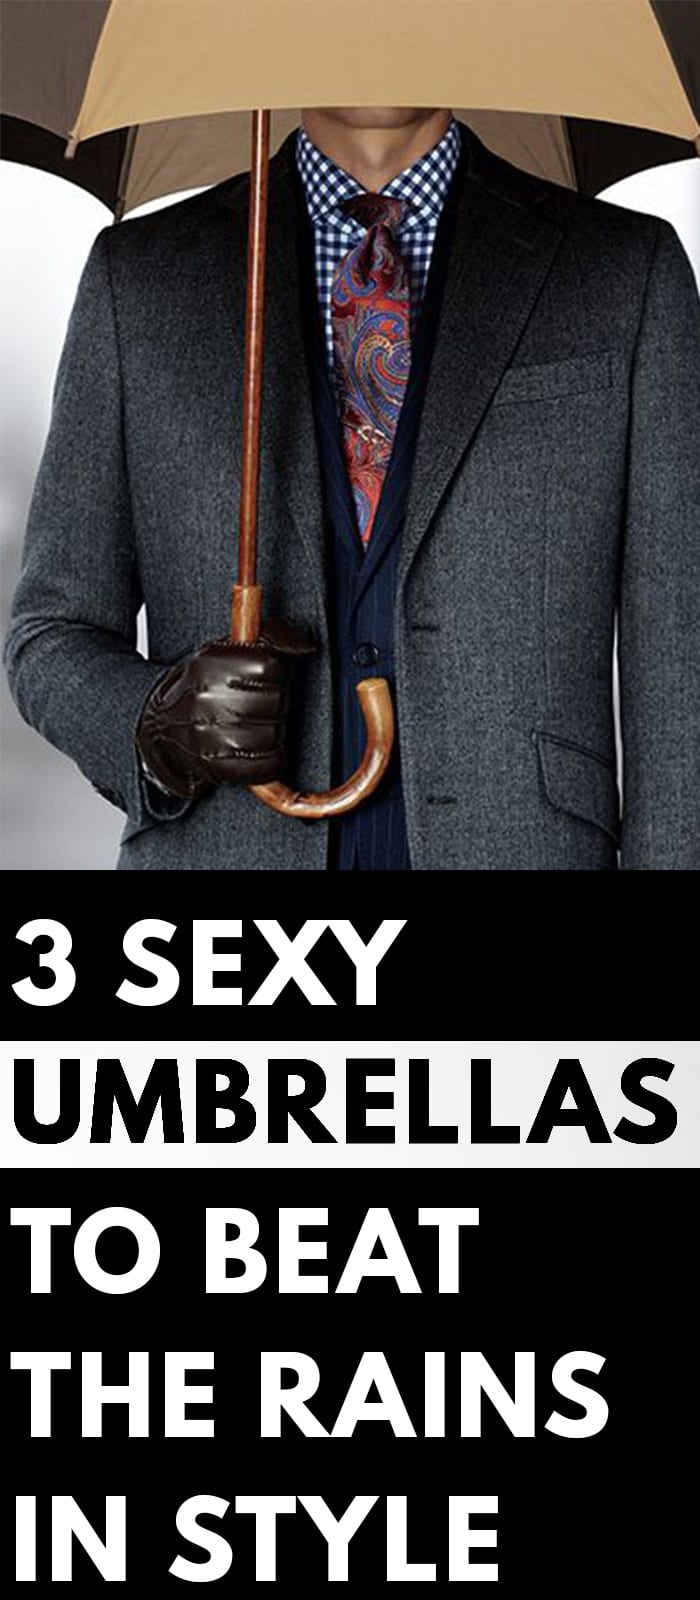 3-Sexy-Umbrellas-to-Beat-The-Rains-In-Style......